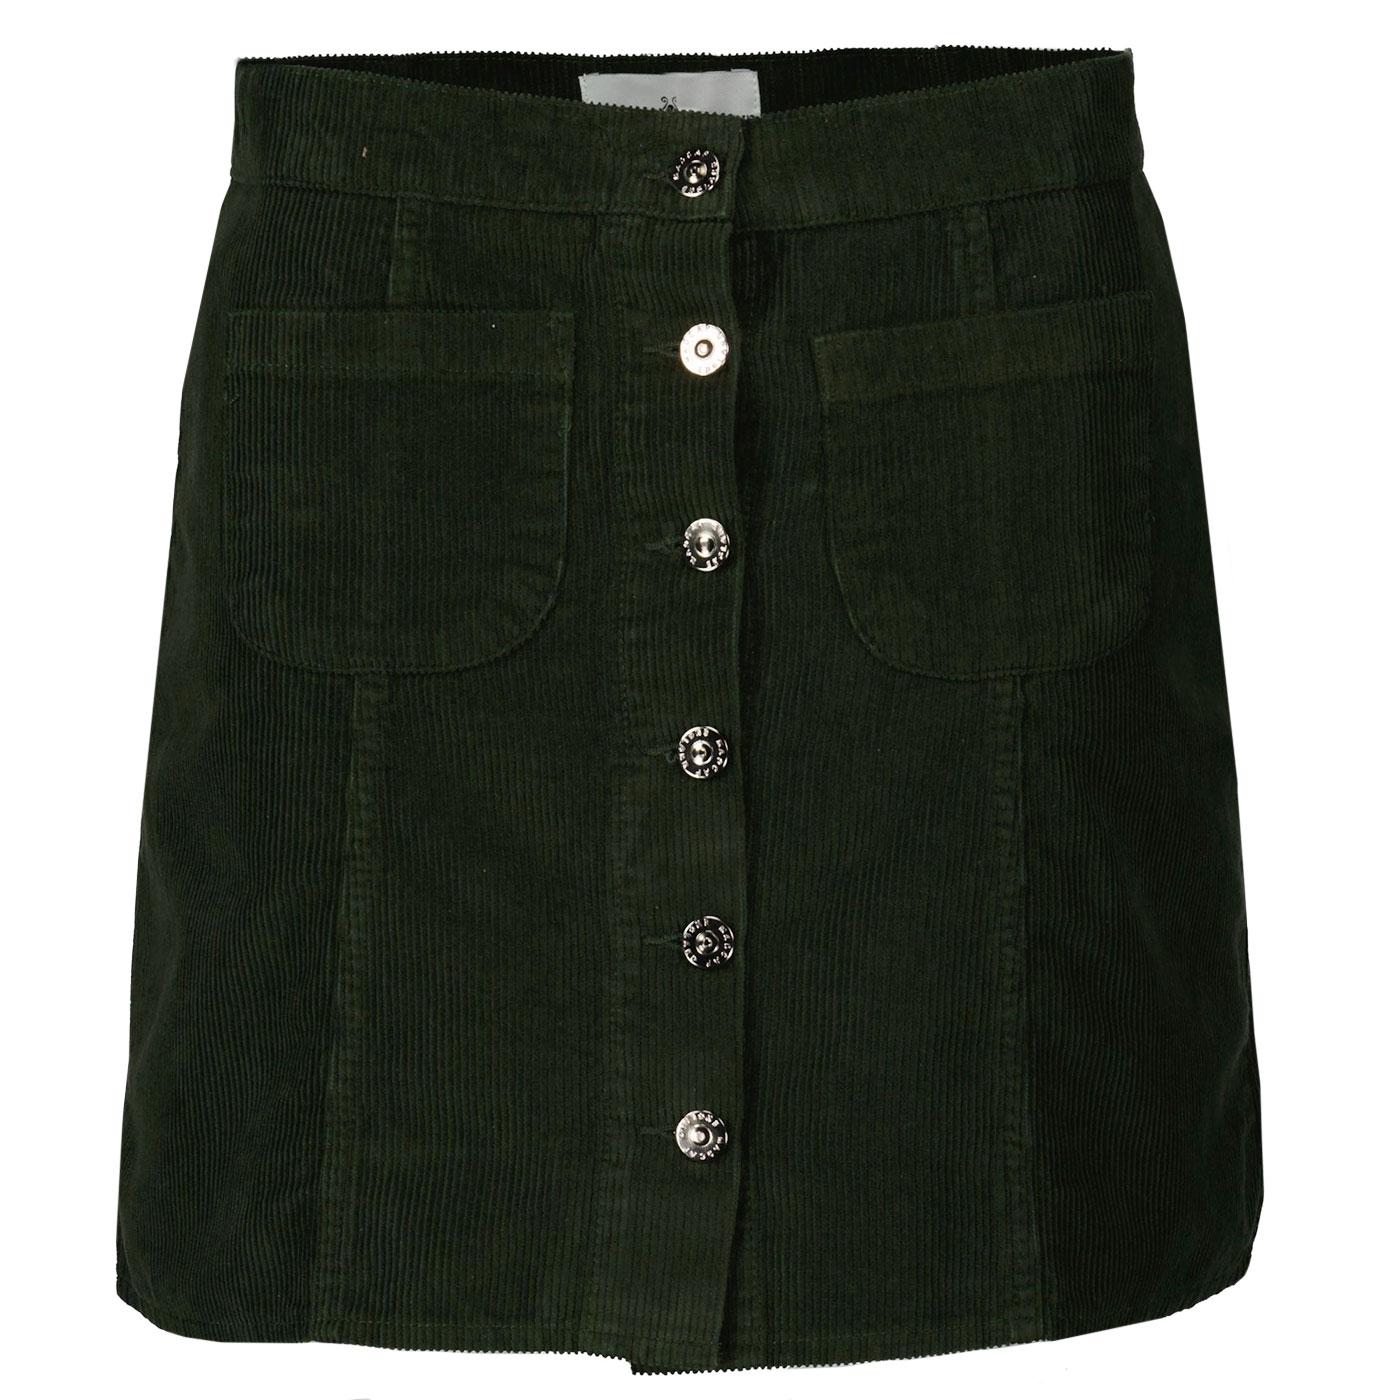 Madcap England Women's Retro 70s Cord A-Line Skirt in Forest Green